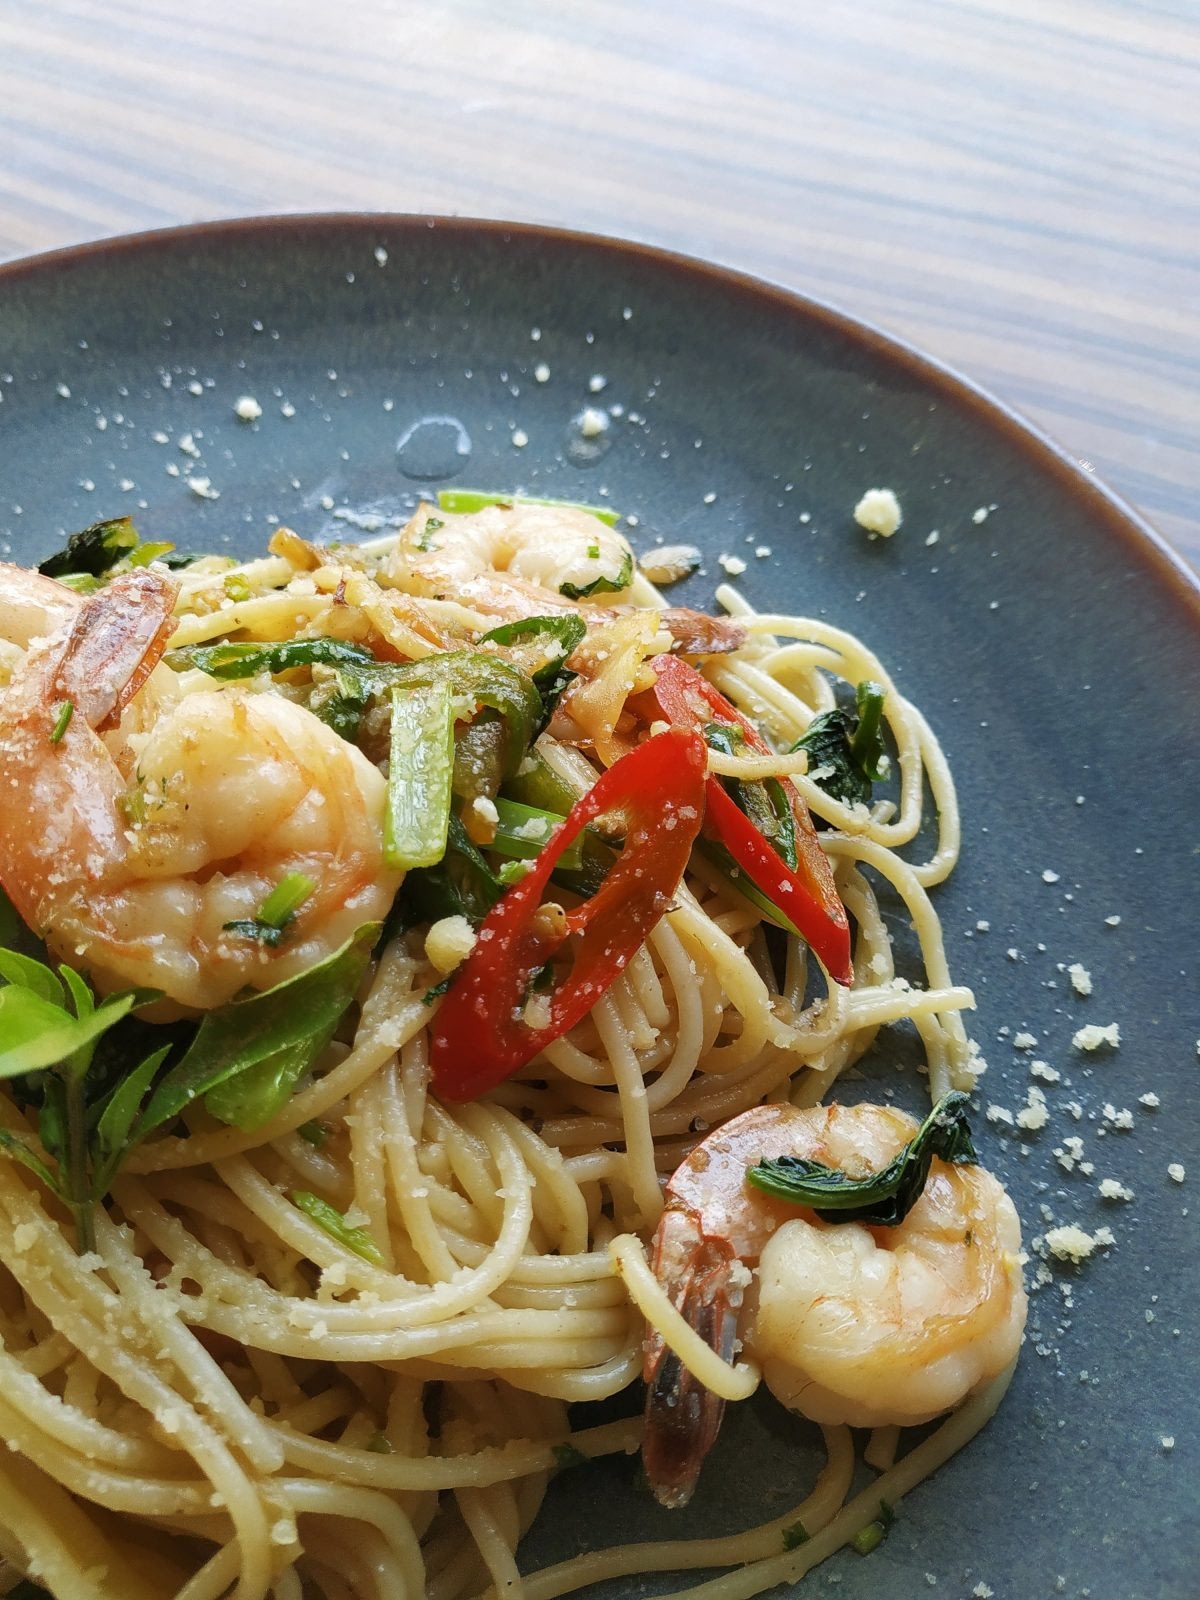 Plate with shrimp pasta and vegetables